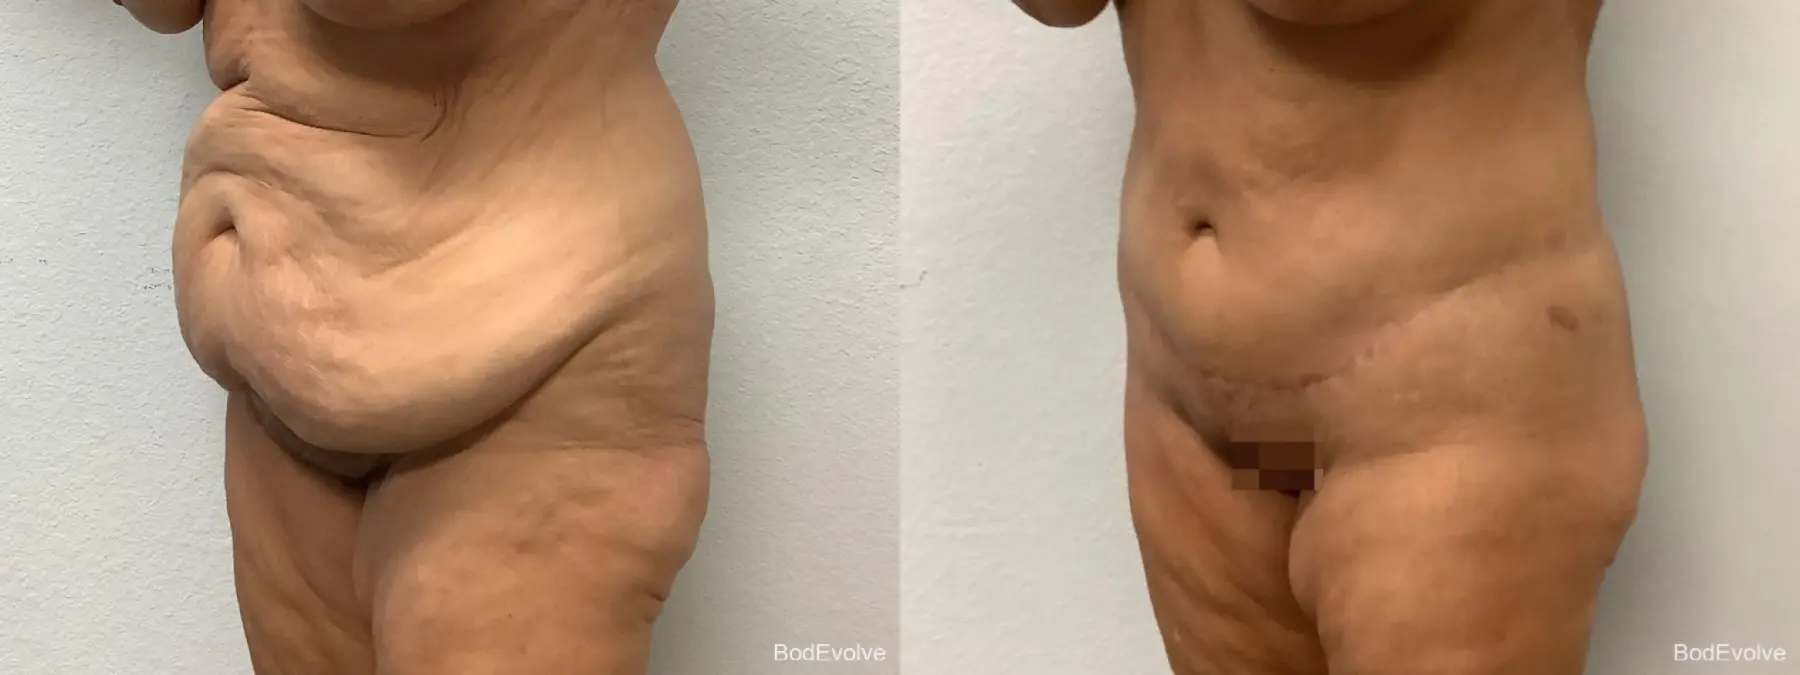 Body Lift: Patient 1 - Before and After 6